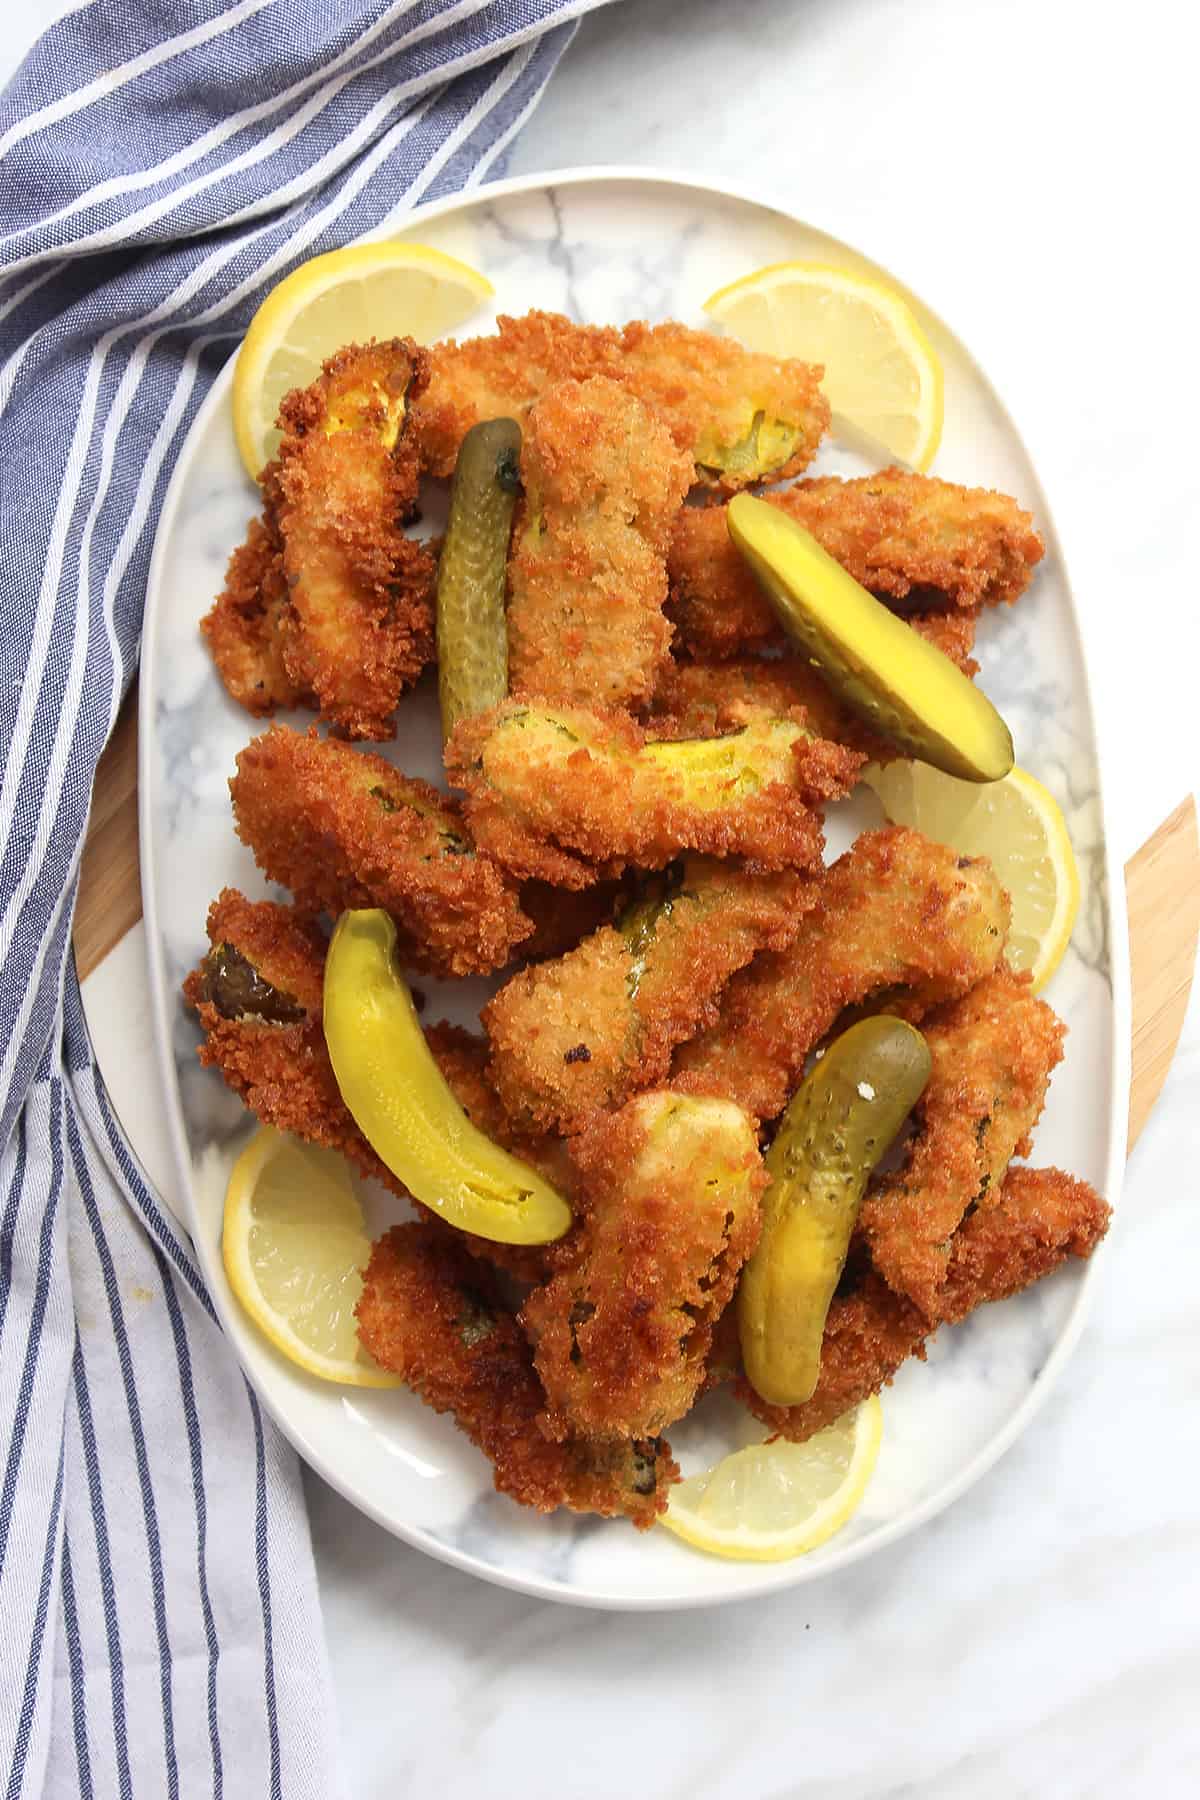 Overhead shot of fried dill pickles on a plate with lemon slices